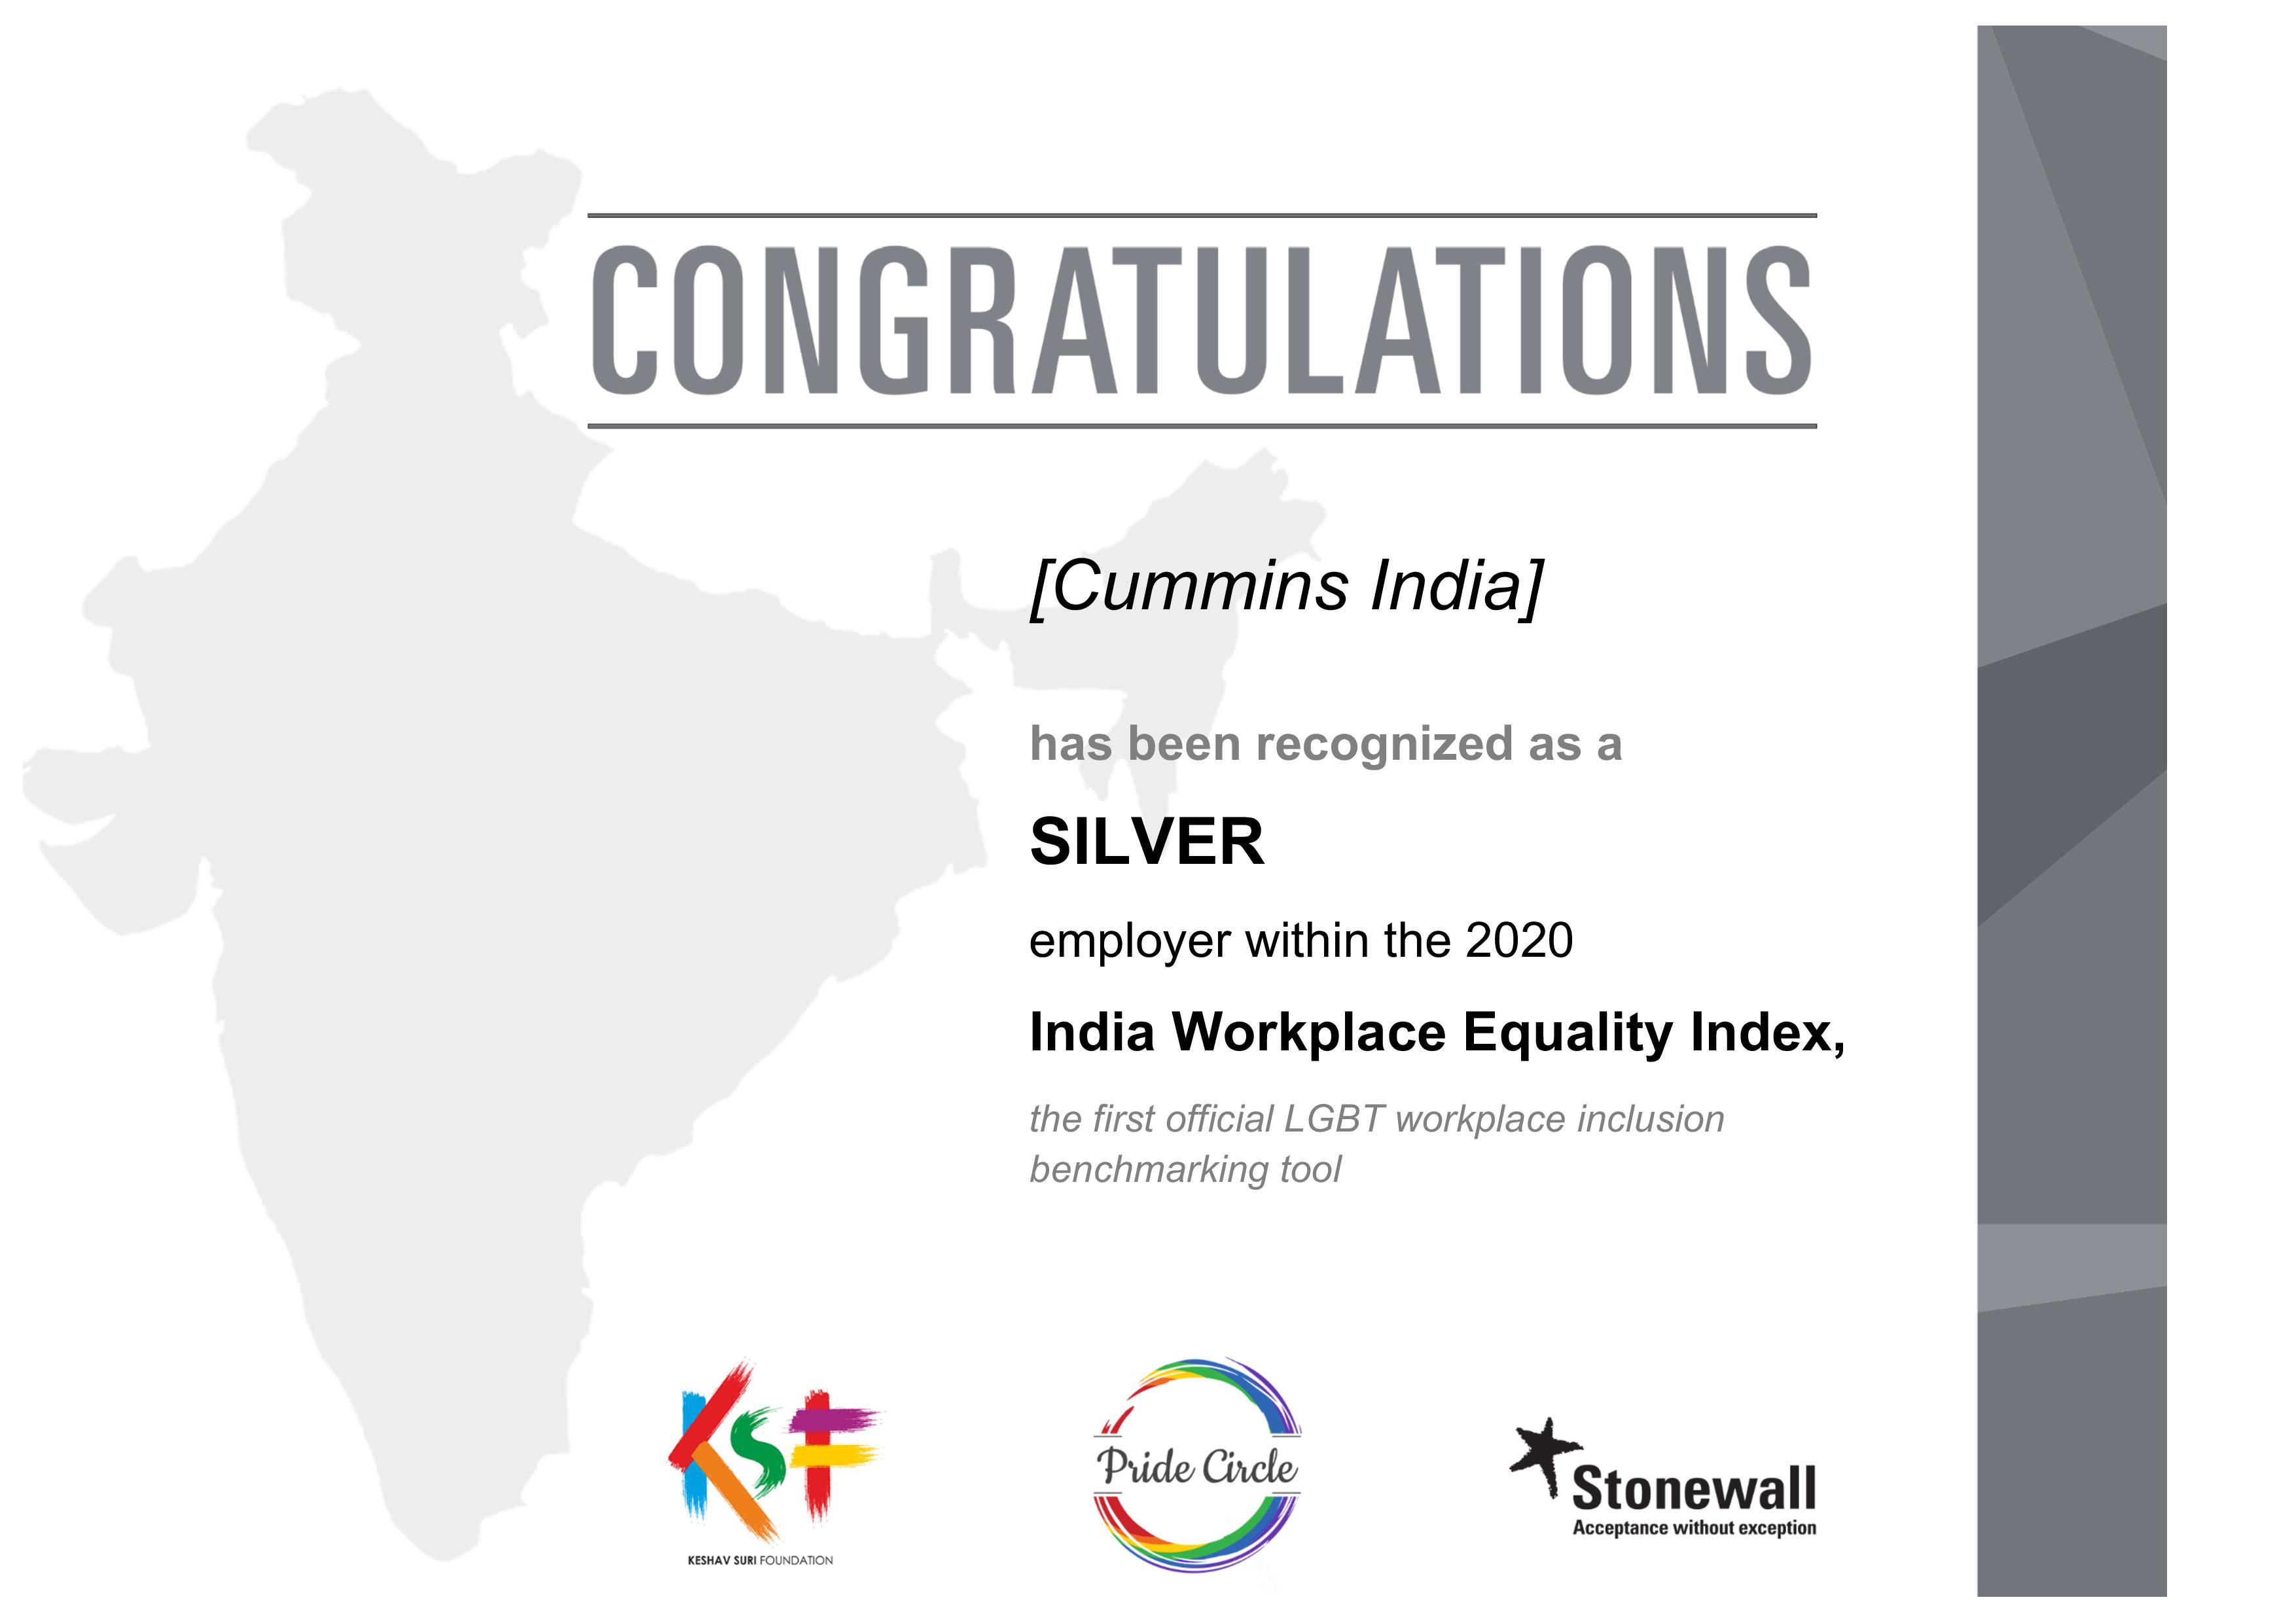 Cummins India has been recognized as a “Silver” employer within the 2020 India Workplace Equality Index decoding=